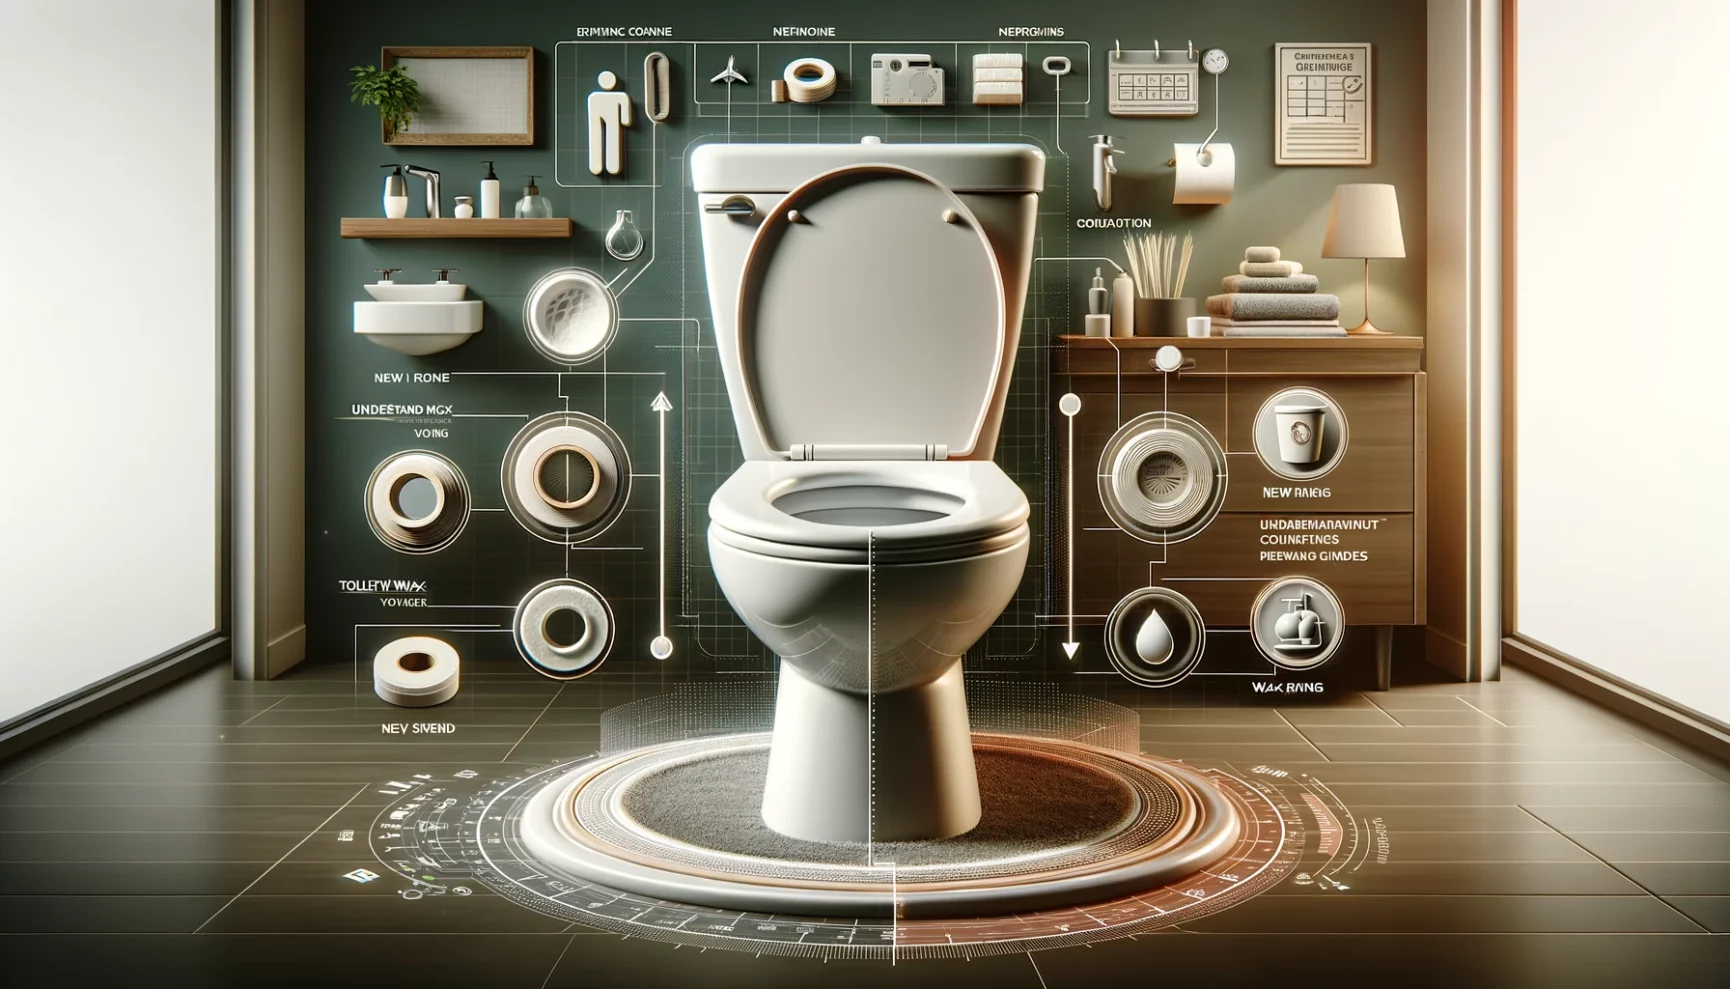 A conceptual illustration of a toilet with futuristic interface and features displayed around it.